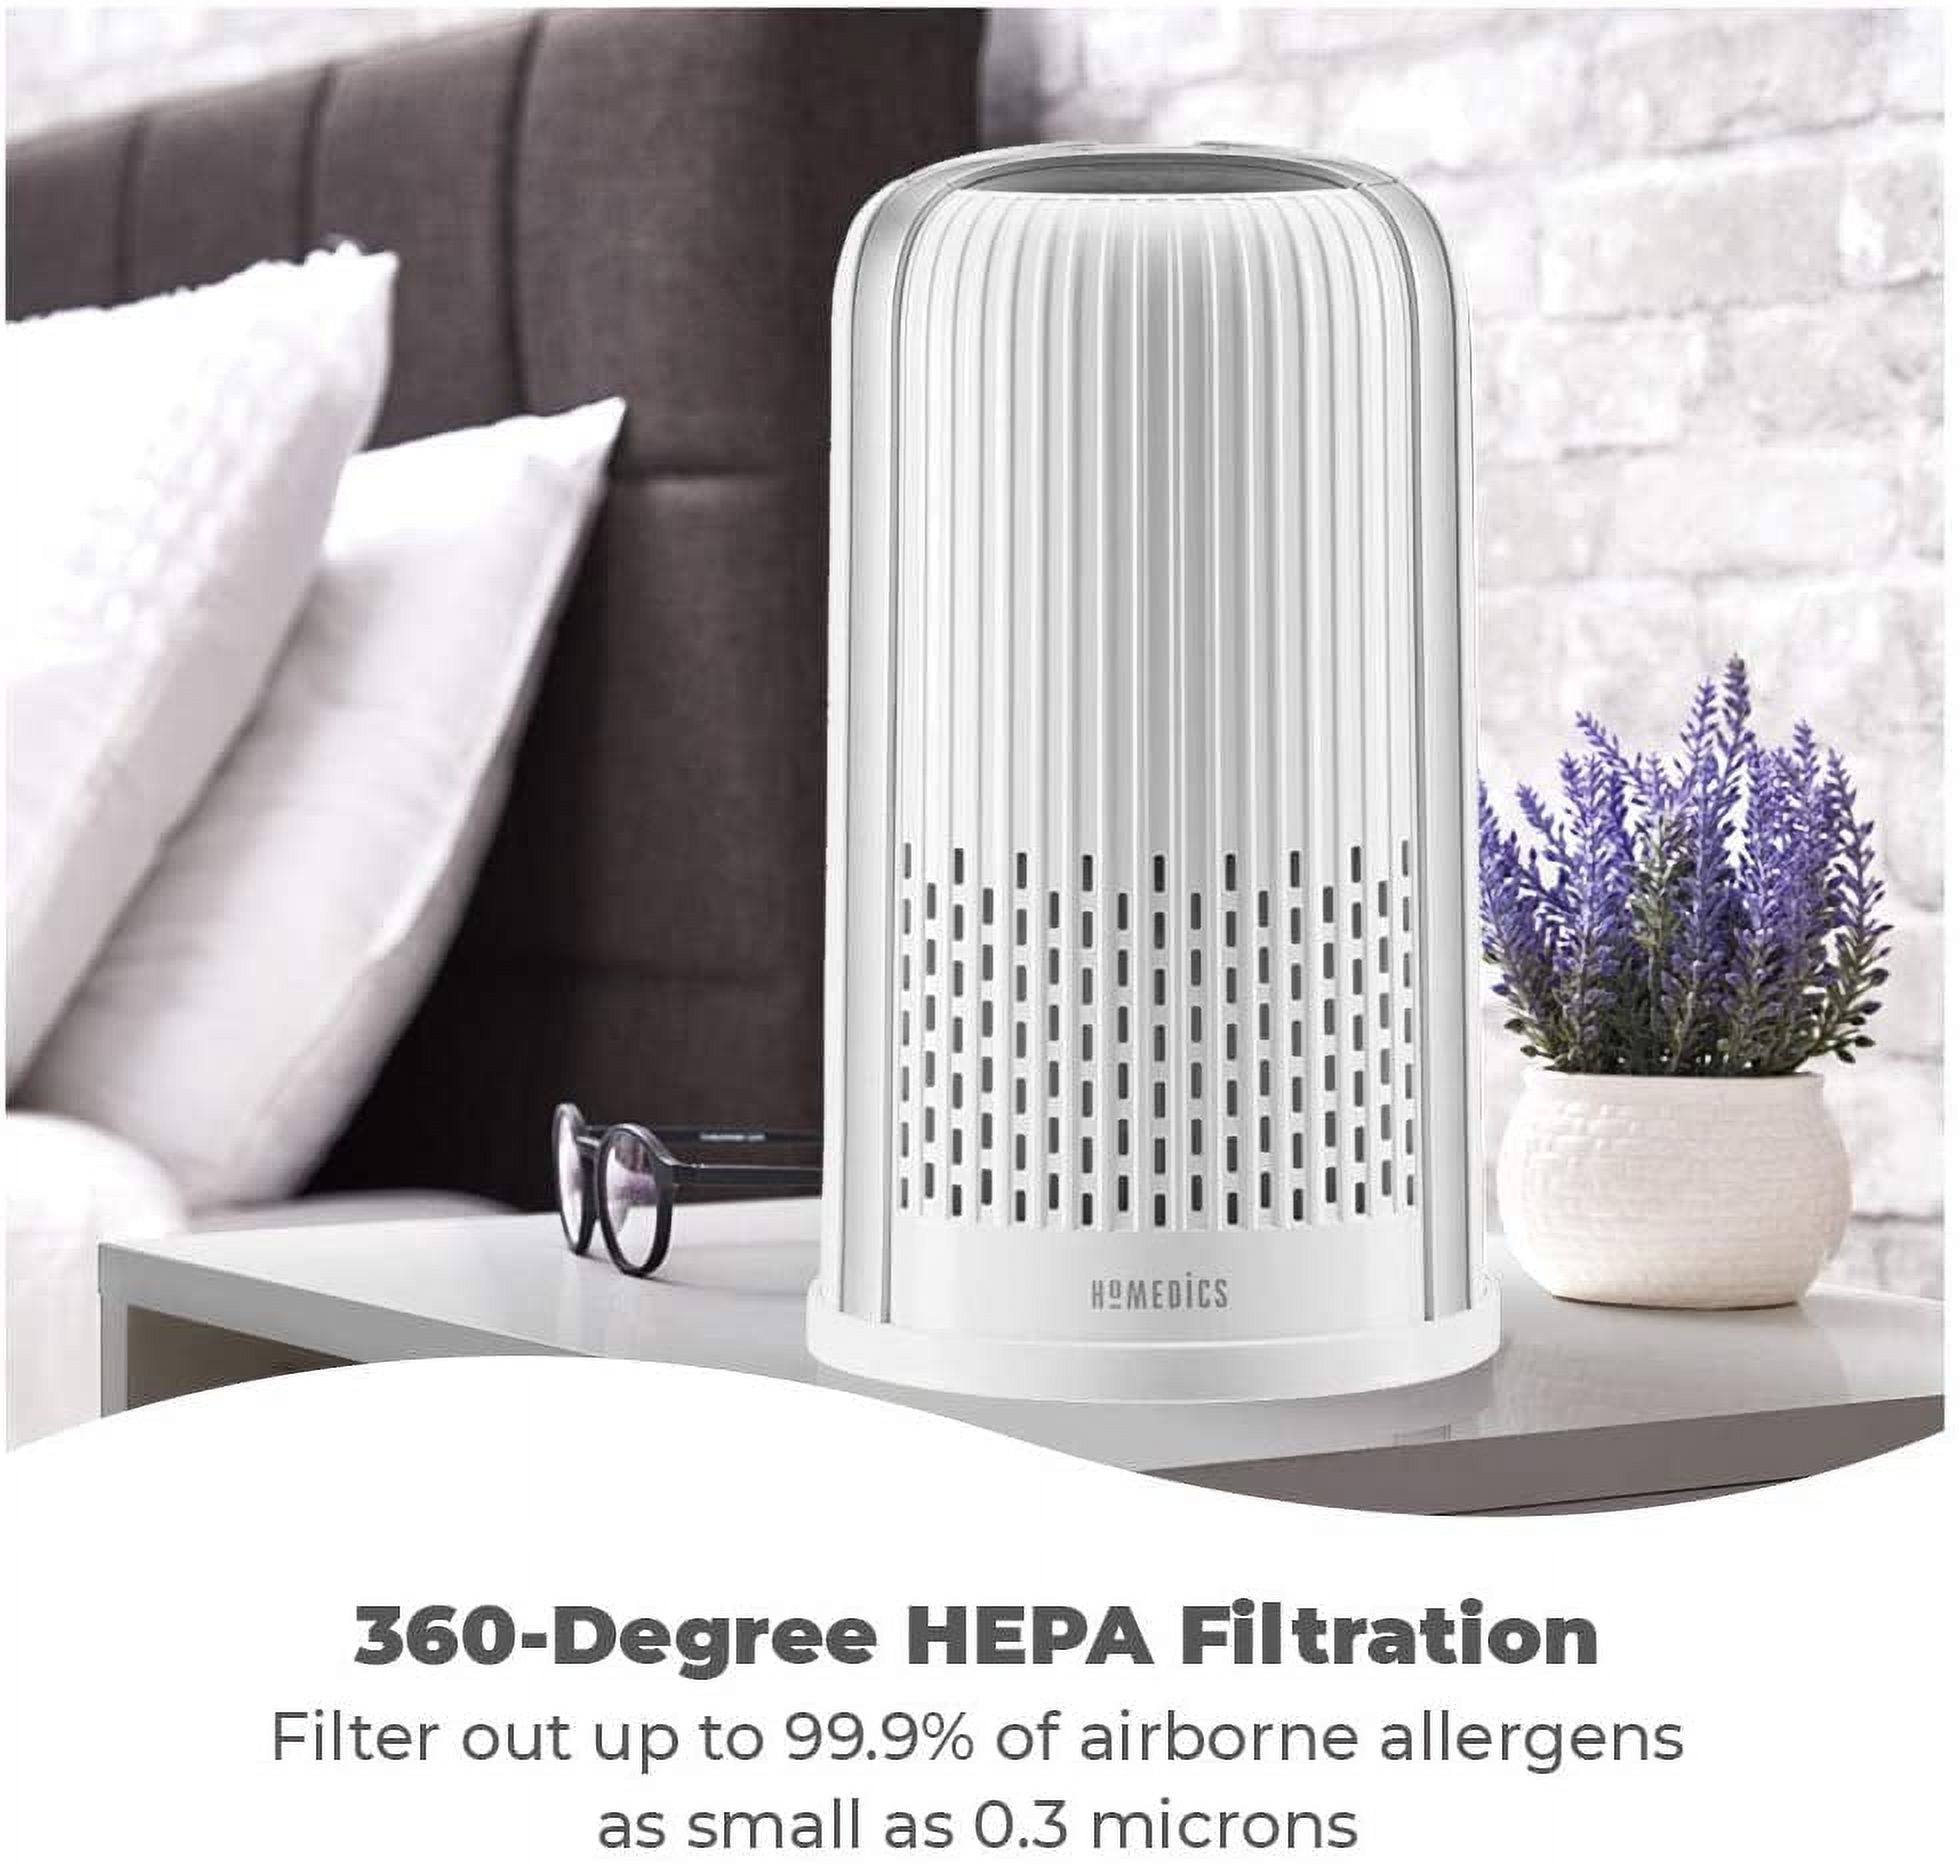 HoMedics Total Clean 4-in-1 Tower Air Purifier, 360-Degree HEPA Filtration, White - image 3 of 7